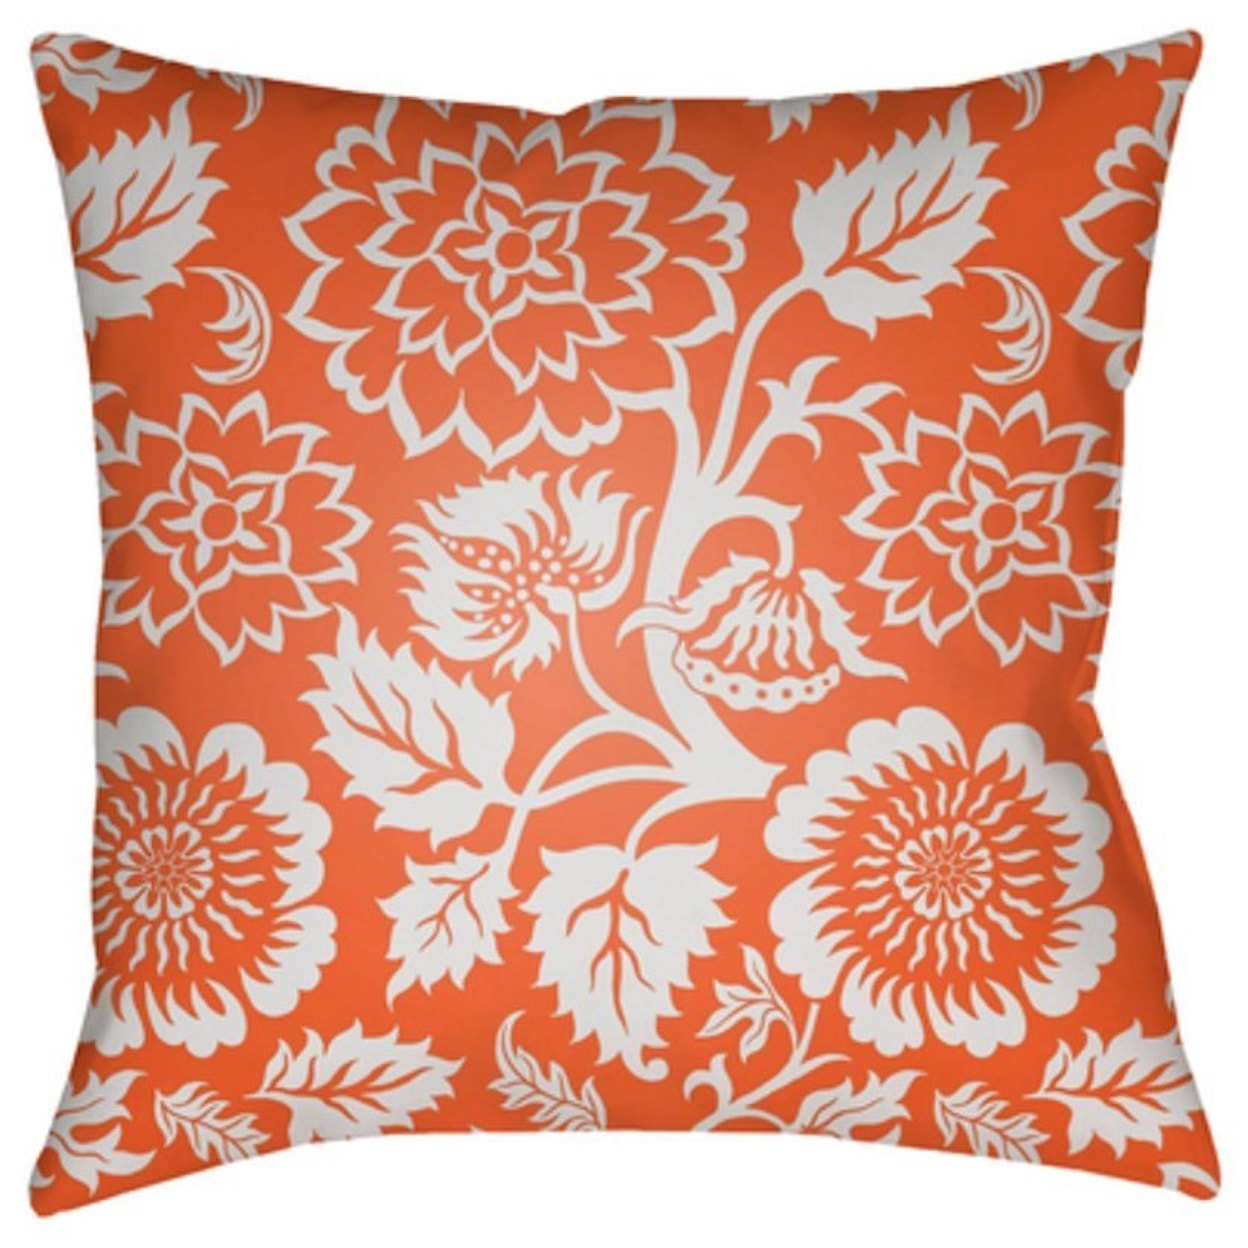 Ruby-Gordon Accents Moody Floral Pillow